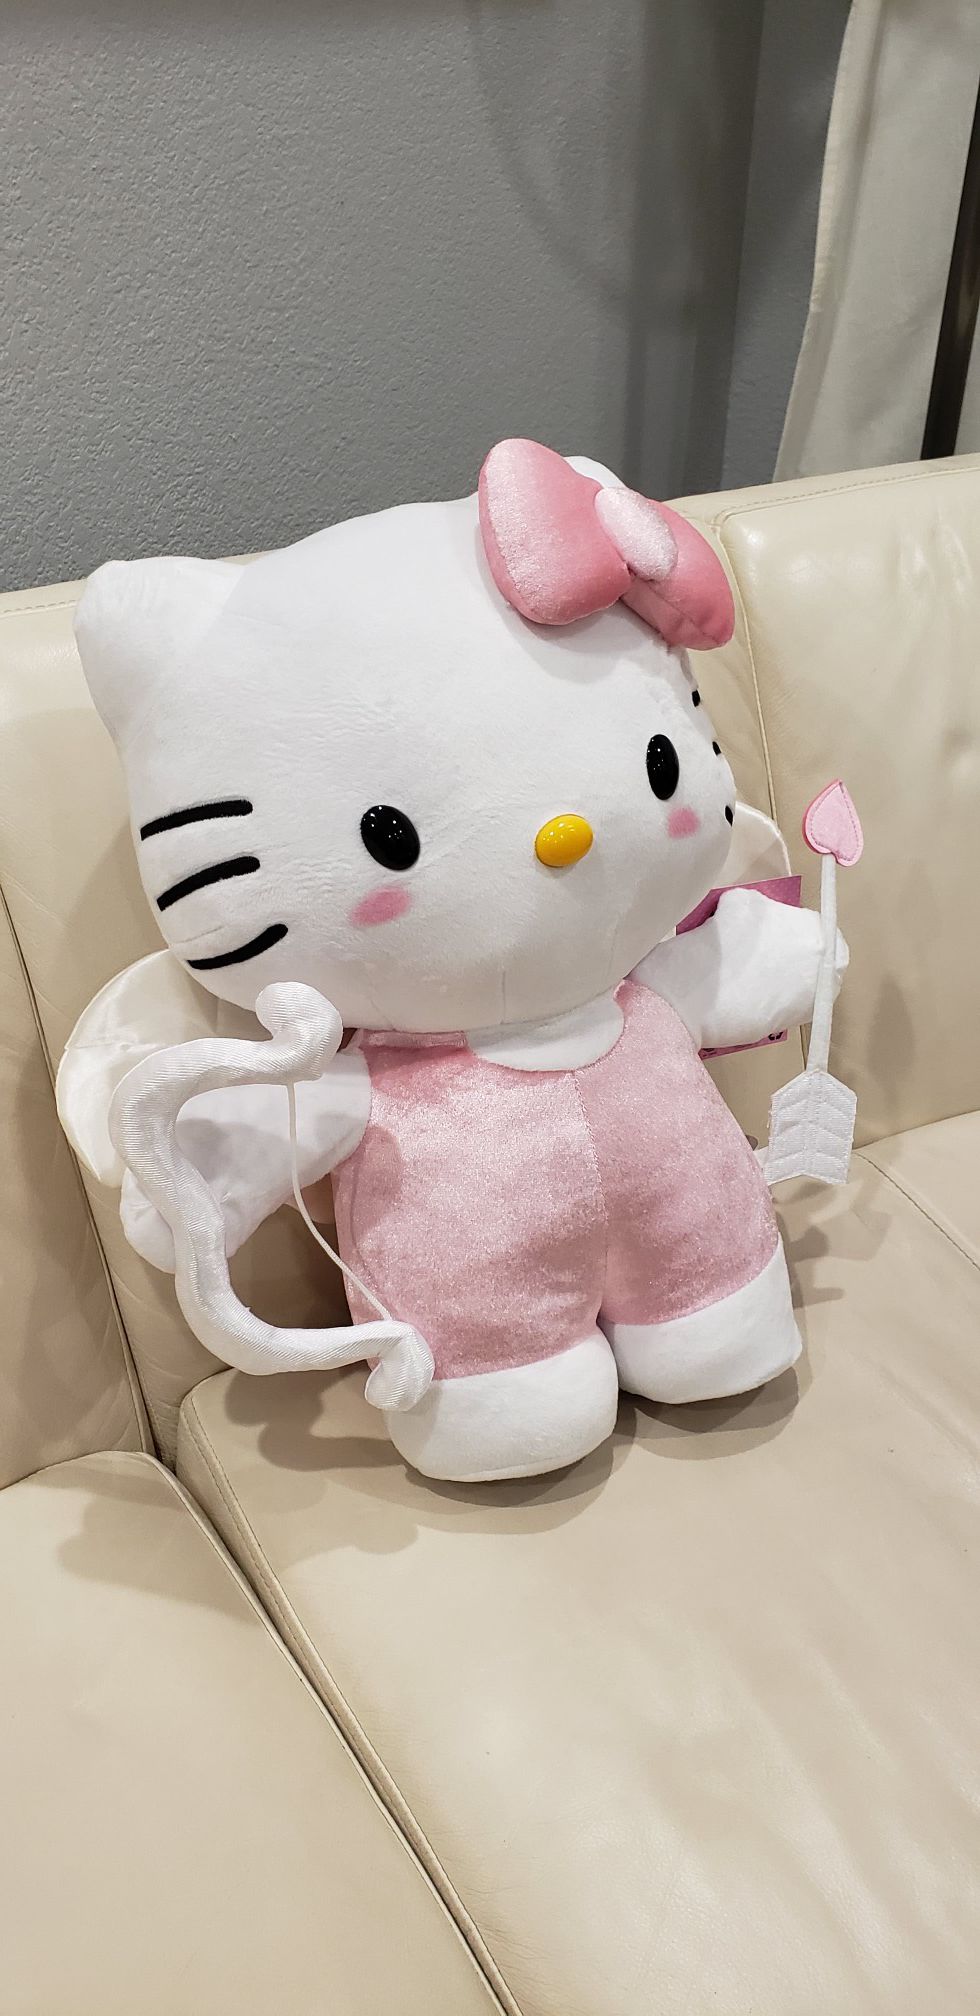 Big Hello Kitty Sanrio Valentine's day love cupid angel 19" tall cute plush stuffed animal brand new with tags. Great Valentine's day gift